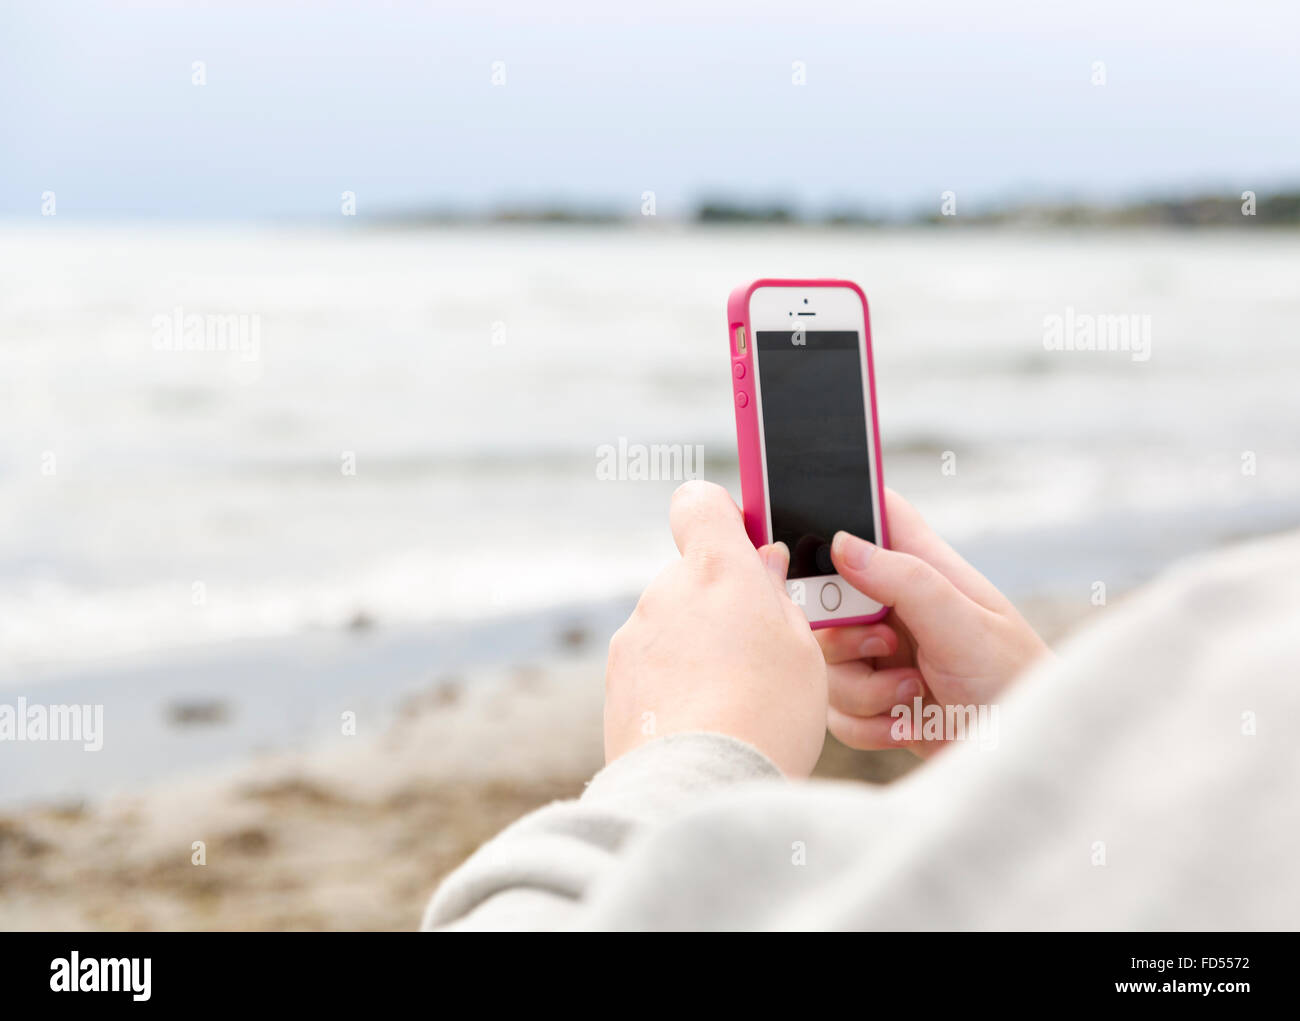 Woman taking a photo of the ocean with her modern white and pink smartphone  Model Release: Yes.  Property Release: No. Stock Photo